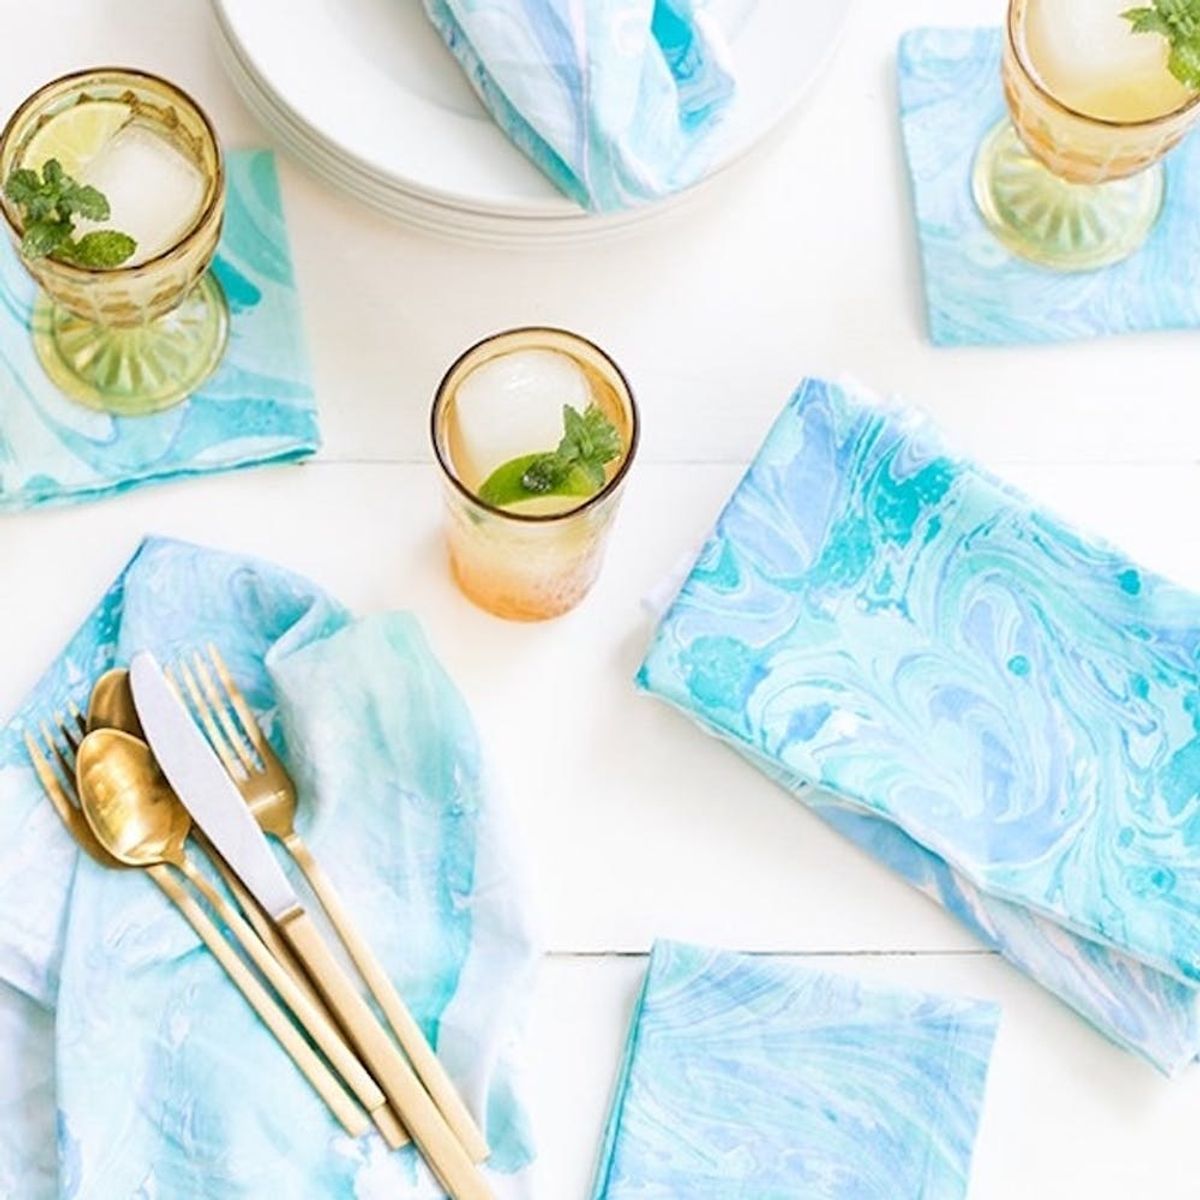 10 Home Decor Hacks from Anthropologie’s “West Coast Modern” Collection